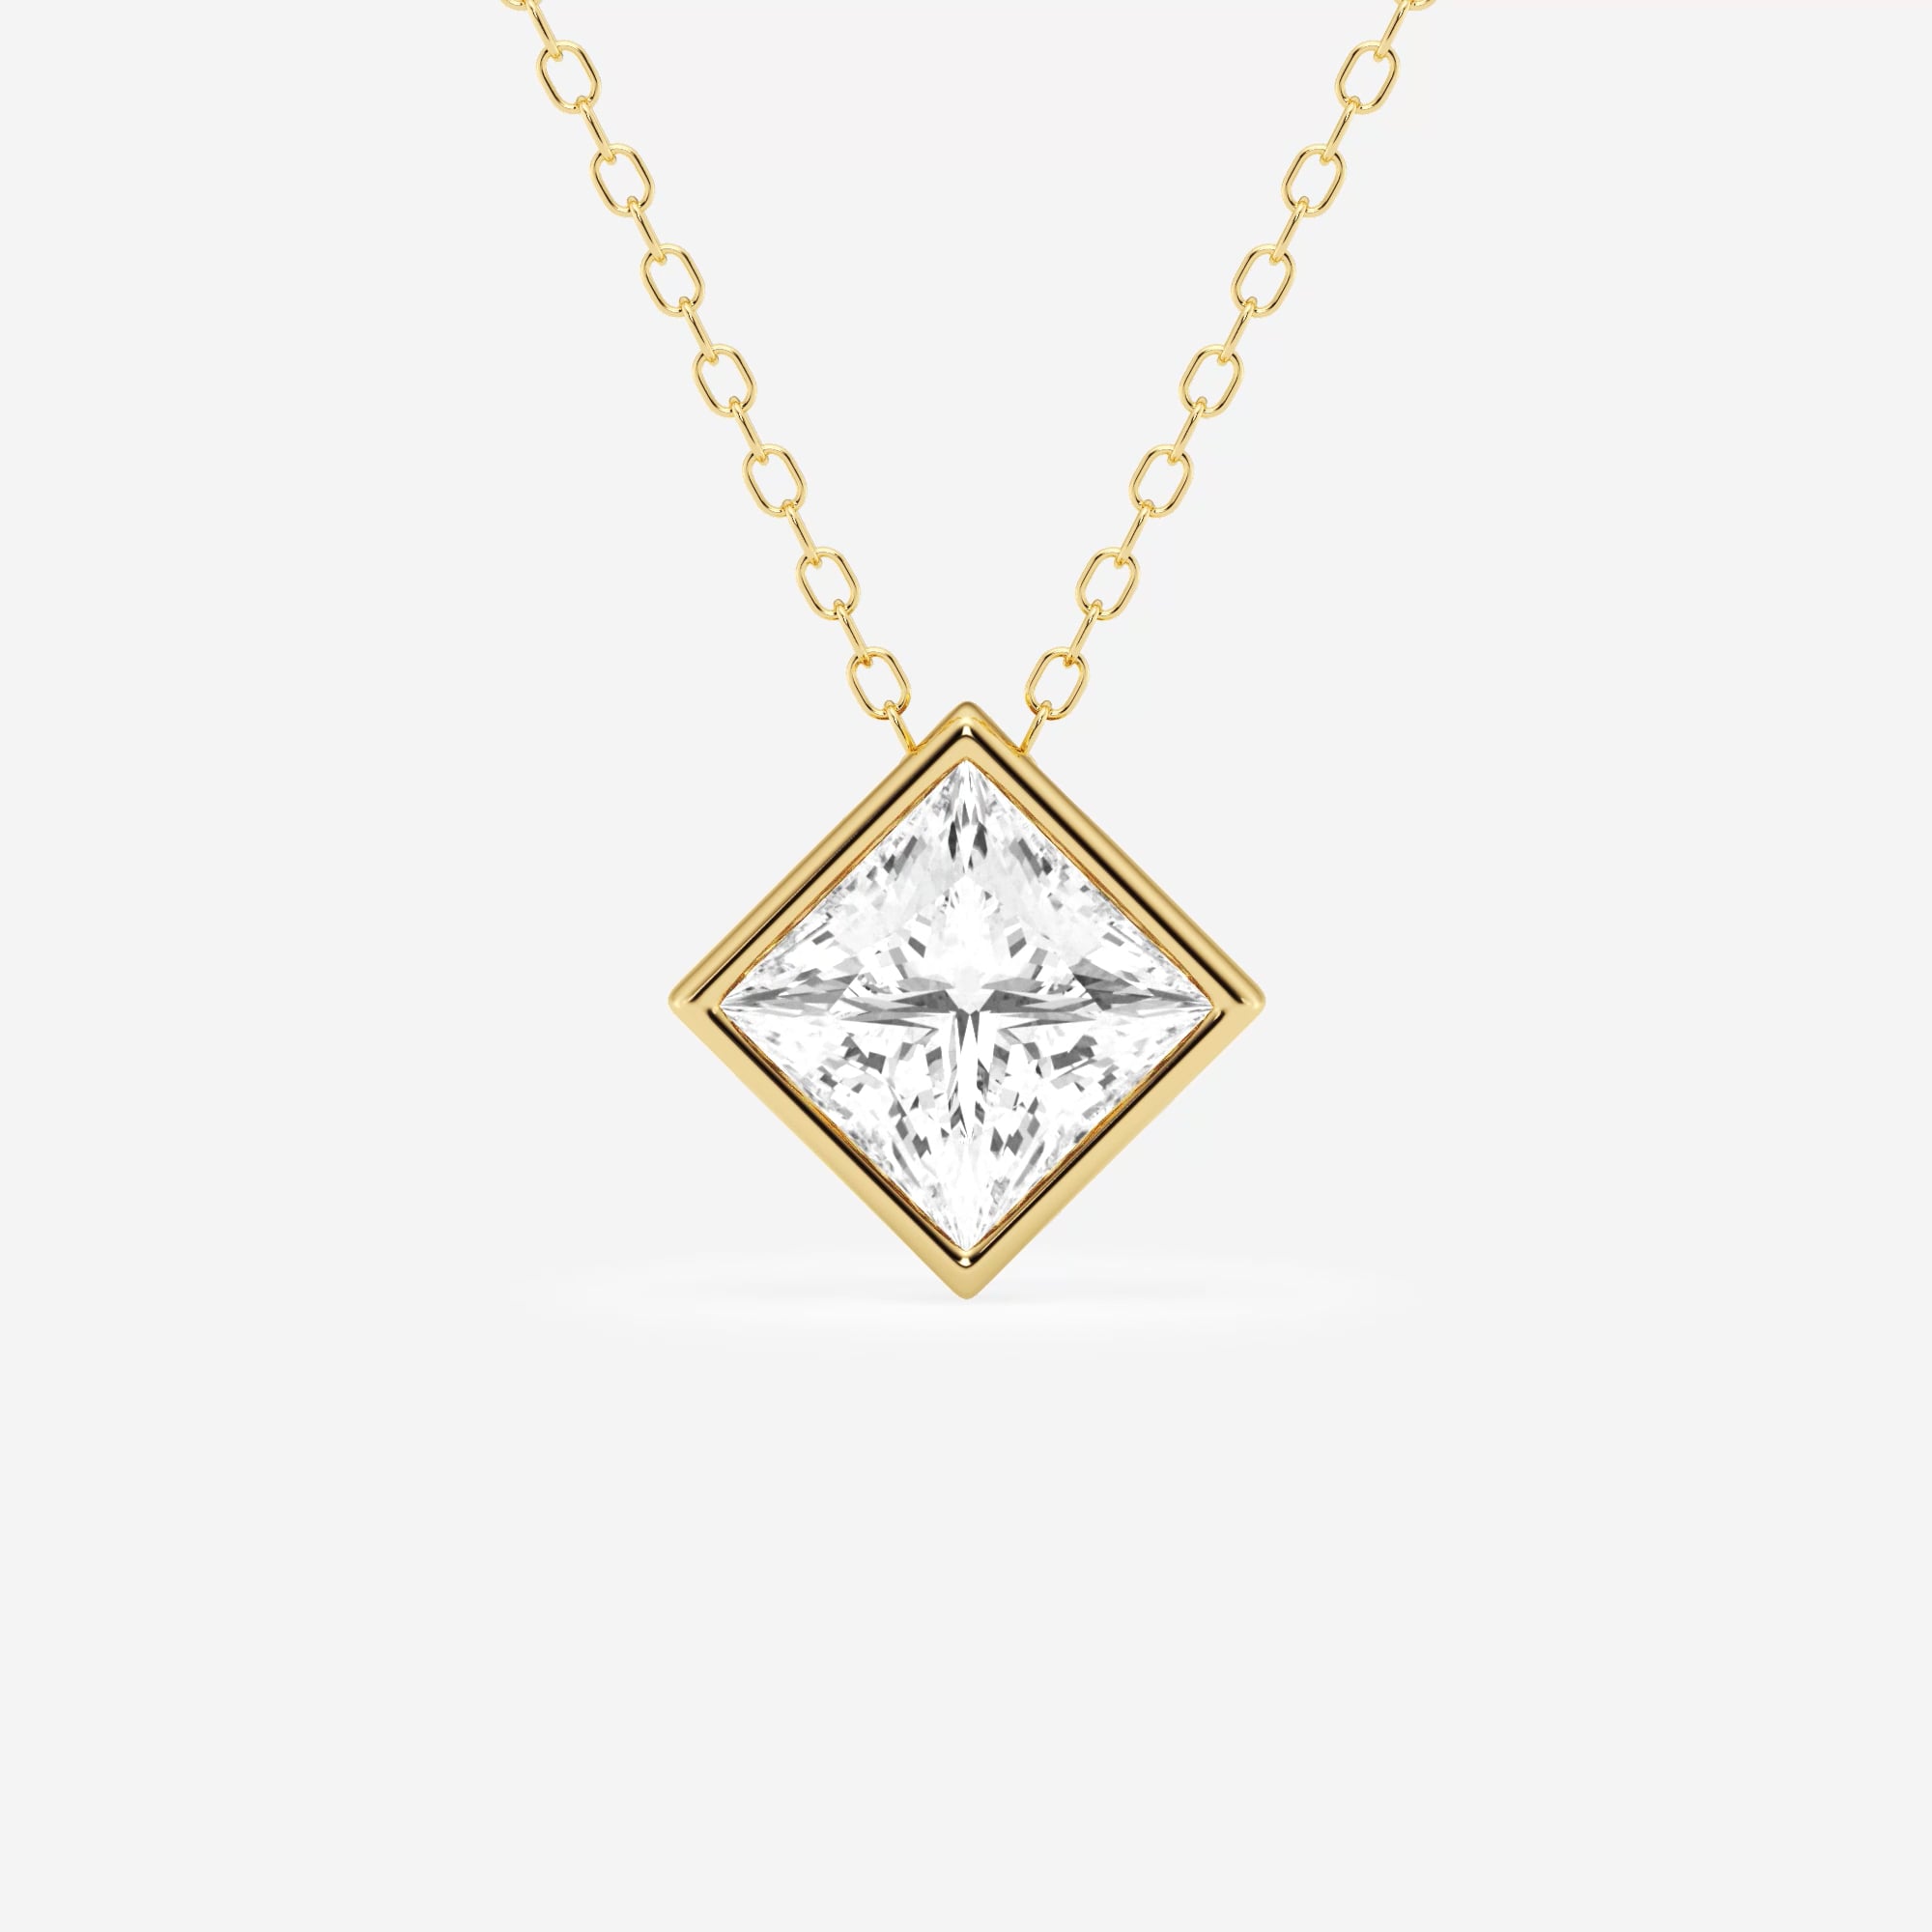 product video for 1 1/2 ctw Princess Lab Grown Diamond Bezel Set Solitaire Pendant with Adjustable Chain